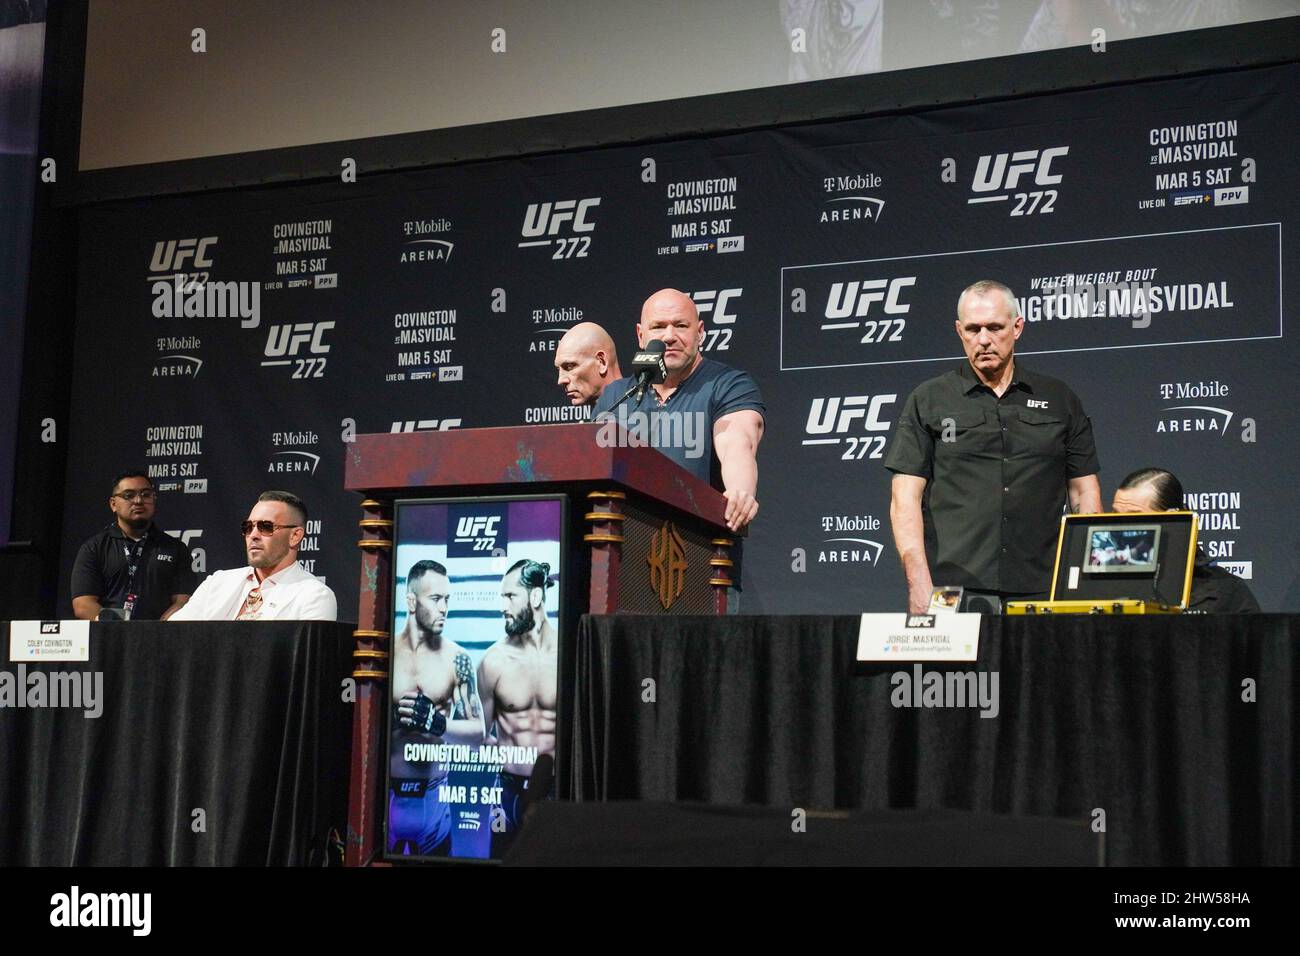 Las Vegas, Nv, United States. 03rd Mar, 2022. LAS VEGAS, NV - March 3: Dana White, Colby Covington and Joge Masvidal speak with the fans and the press at KA MGM Theatre for UFC 272: Covington vs Masvidal - Press Conference on March 3, 2022 in Las Vegas, NV, United States. (Photo by Louis Grasse/PxImages) Credit: Px Images/Alamy Live News Stock Photo